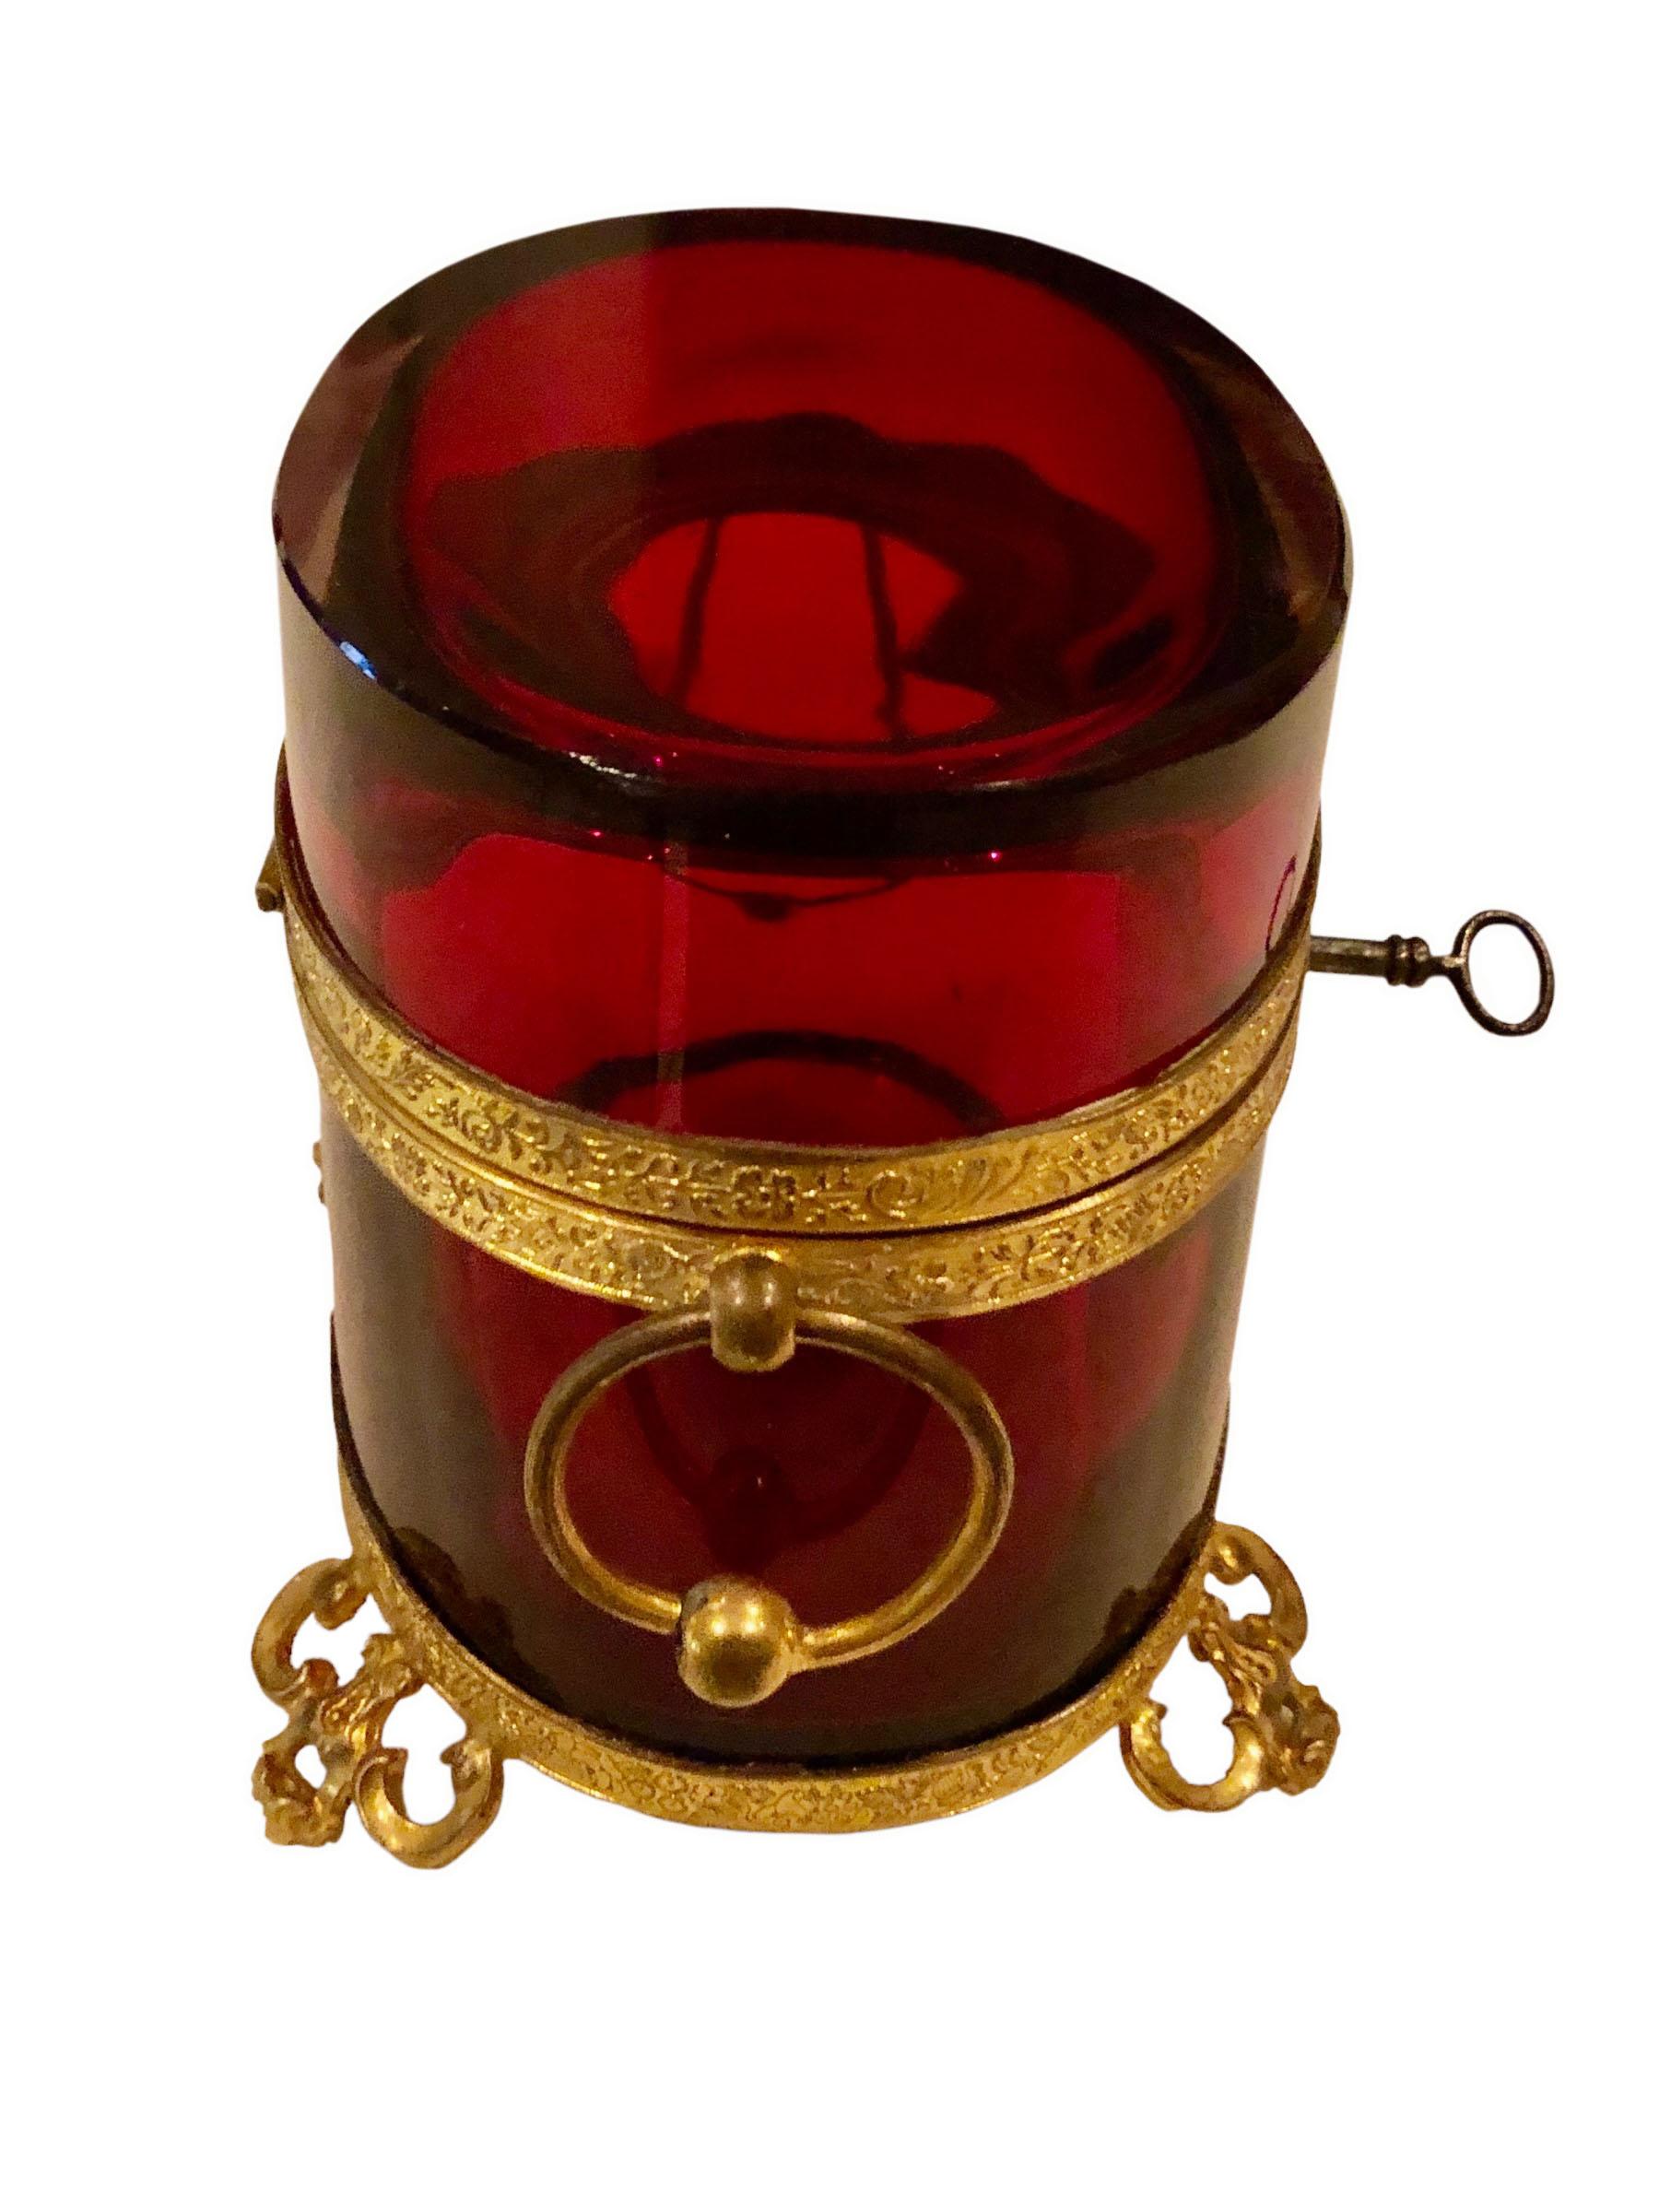 Red crystal French box with bronze dore. Box has two ring handles on the sides and is strapped in bronze doré. In amazing condition no chips no scratches. Has original key.